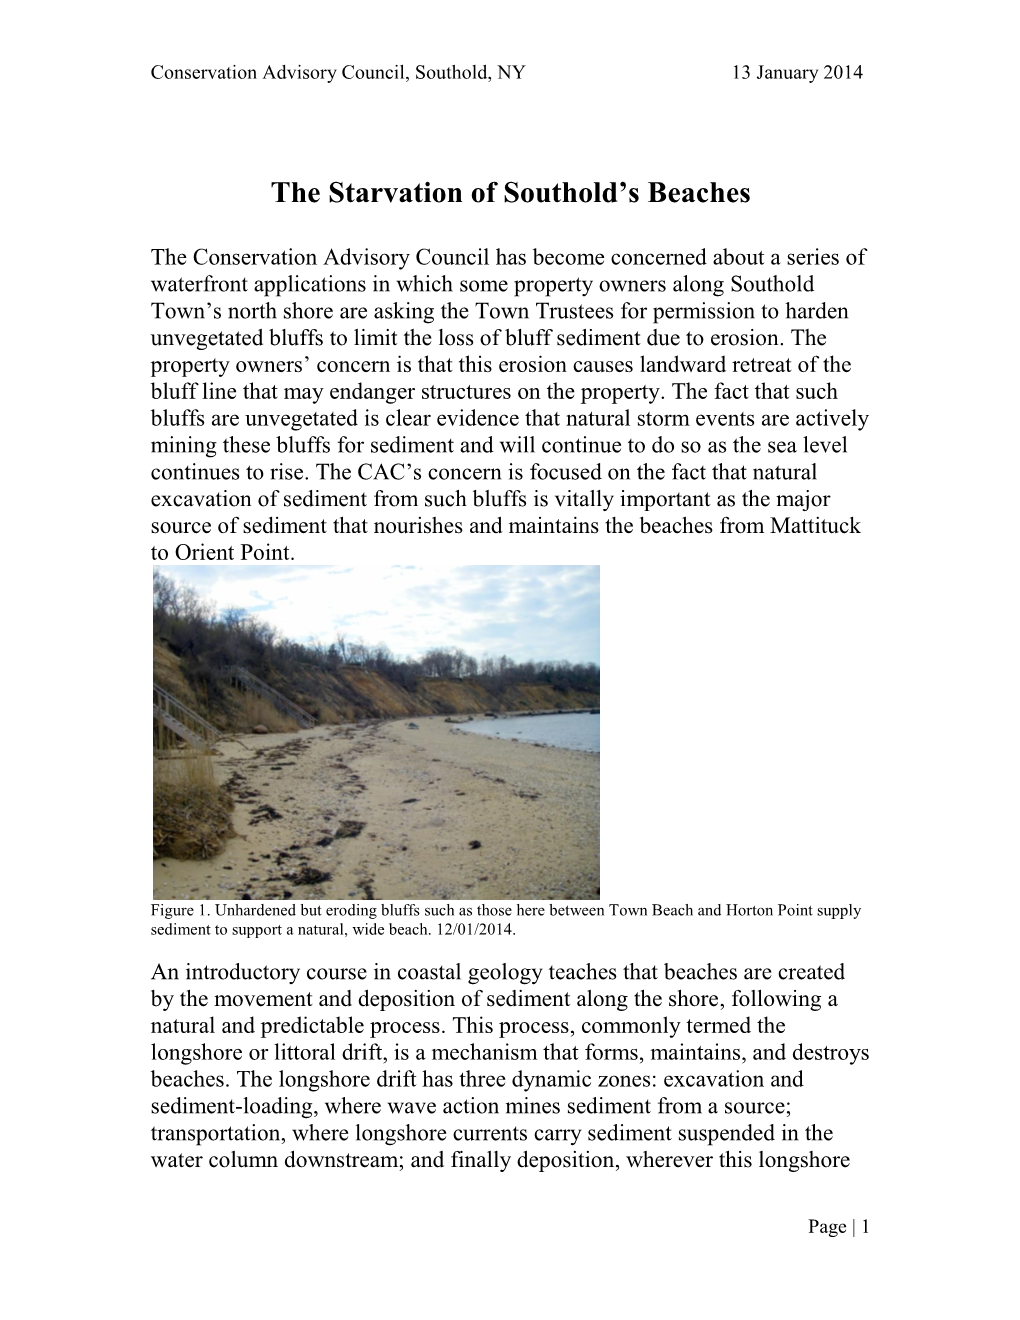 The Starvation of Southold's Beaches